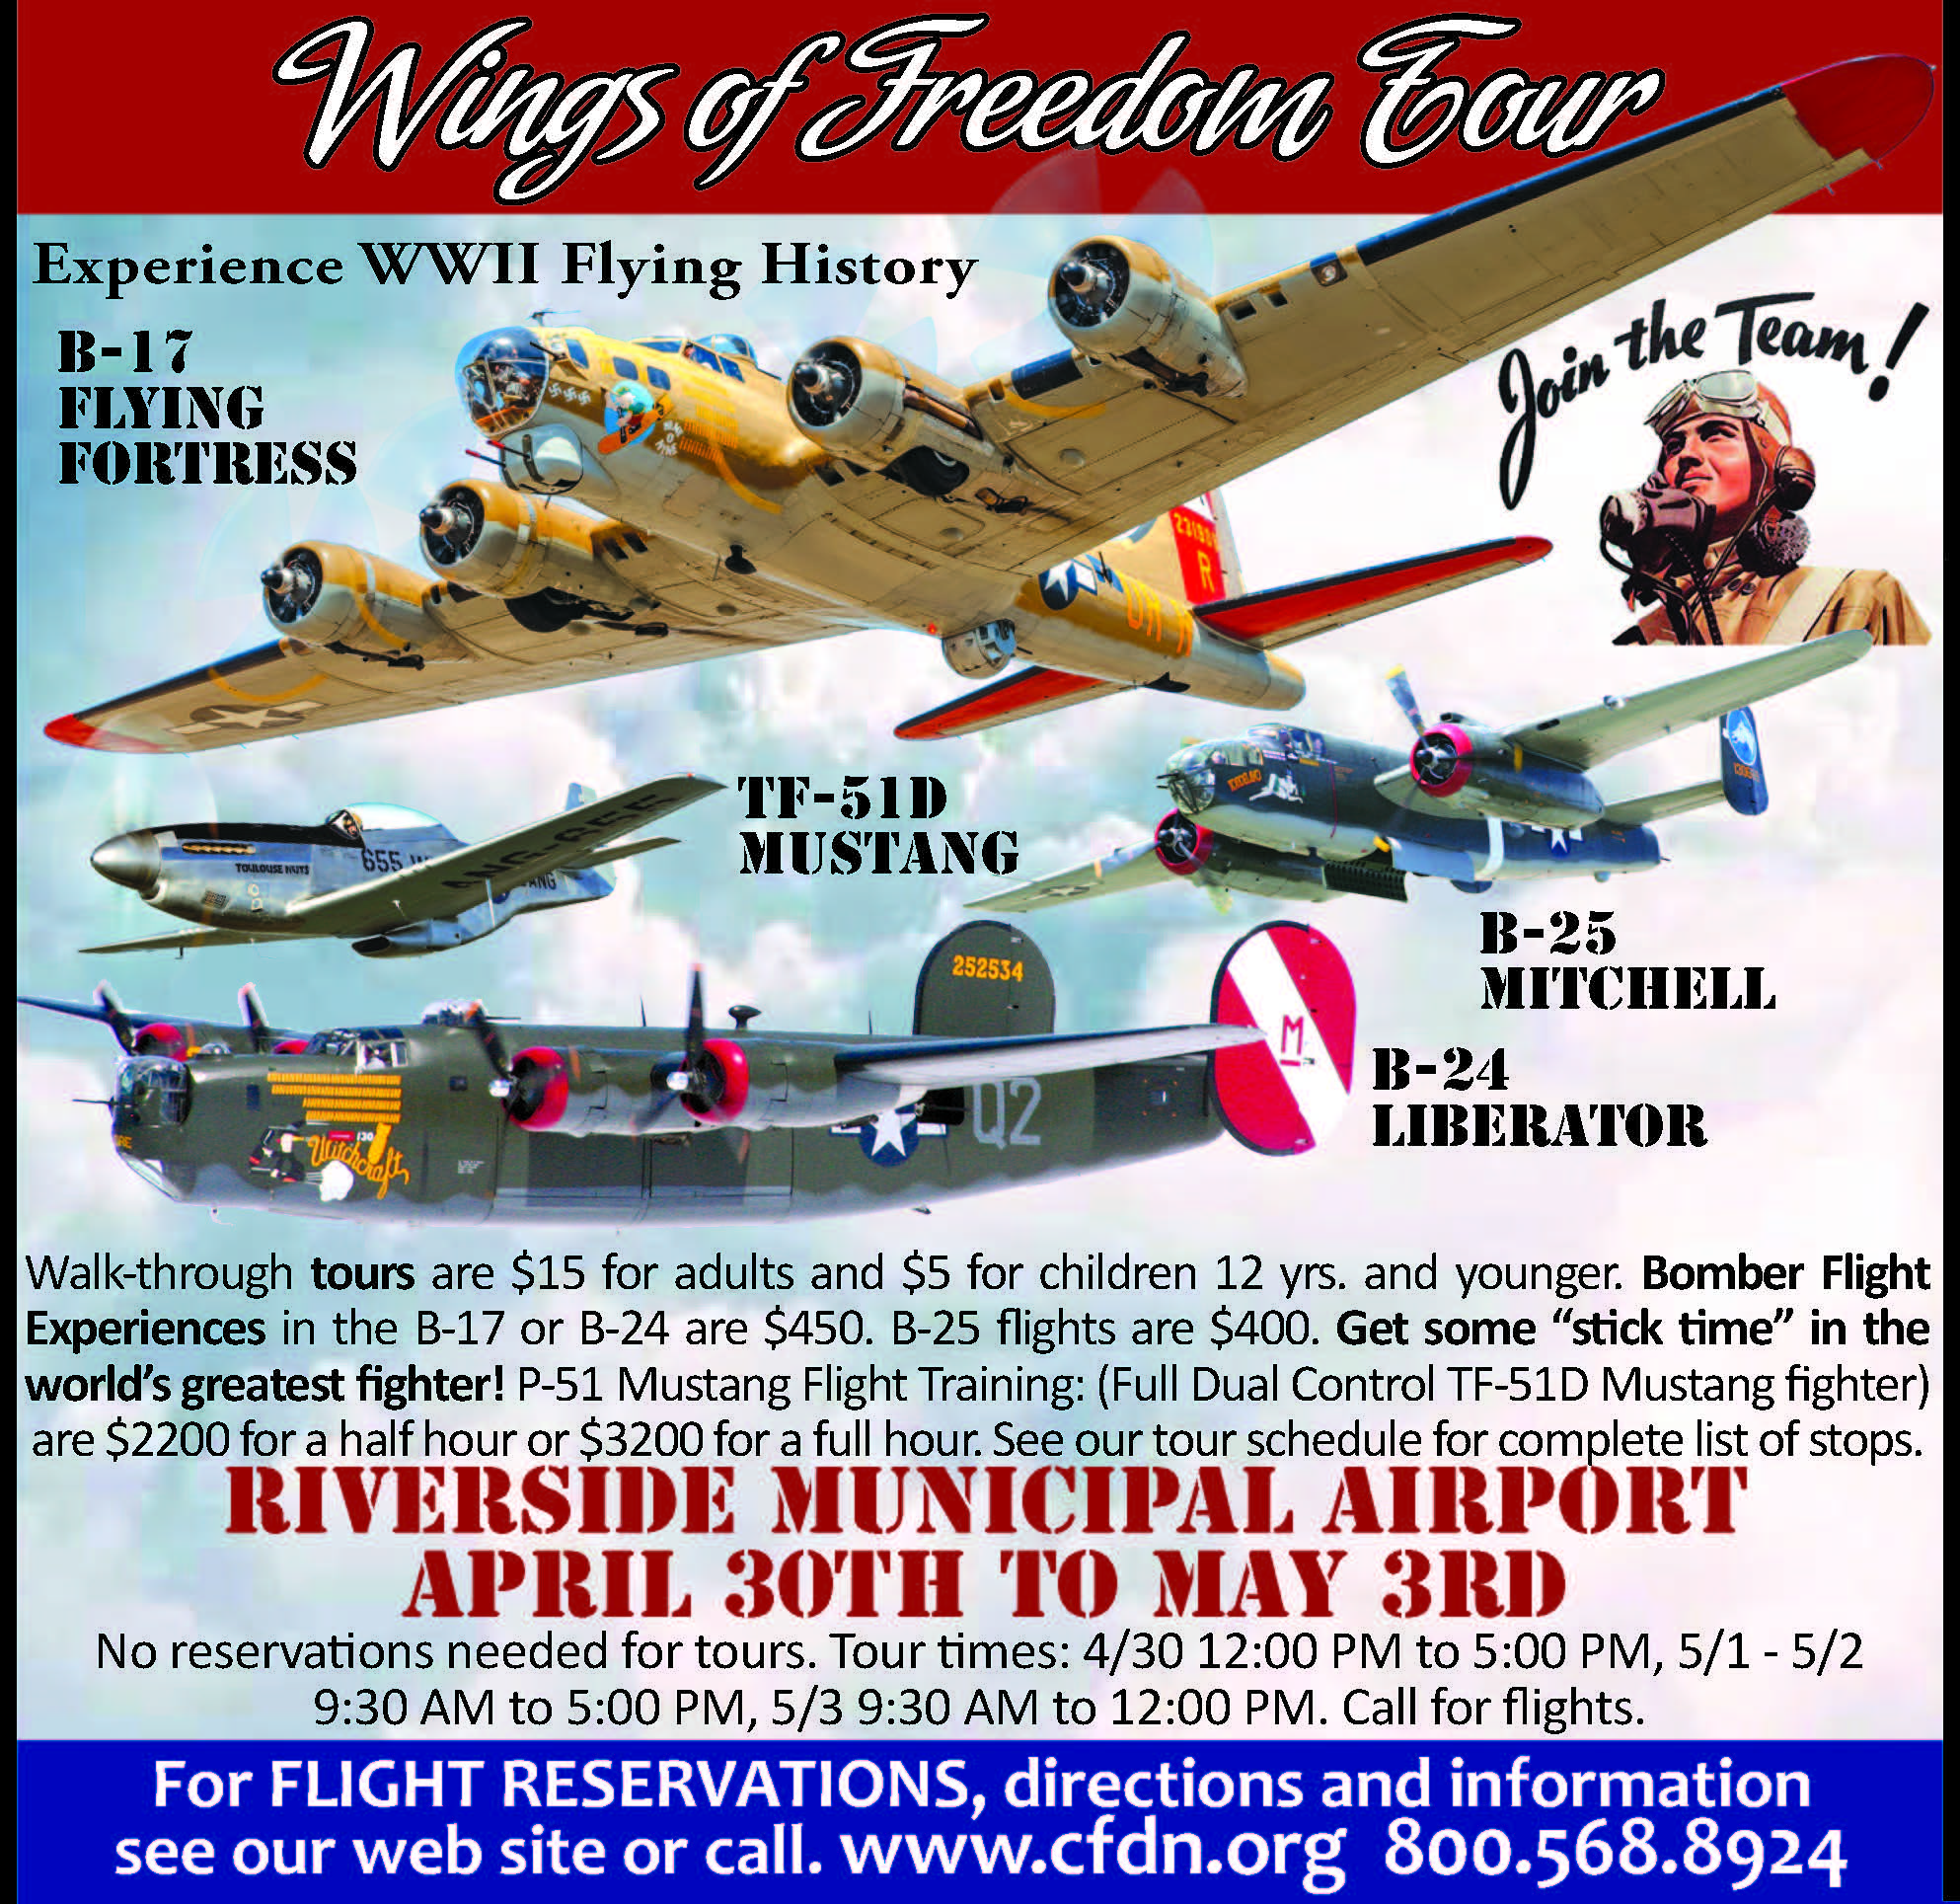 Wings of Freedom Tour Lands at Riverside Municipal Airport Monday